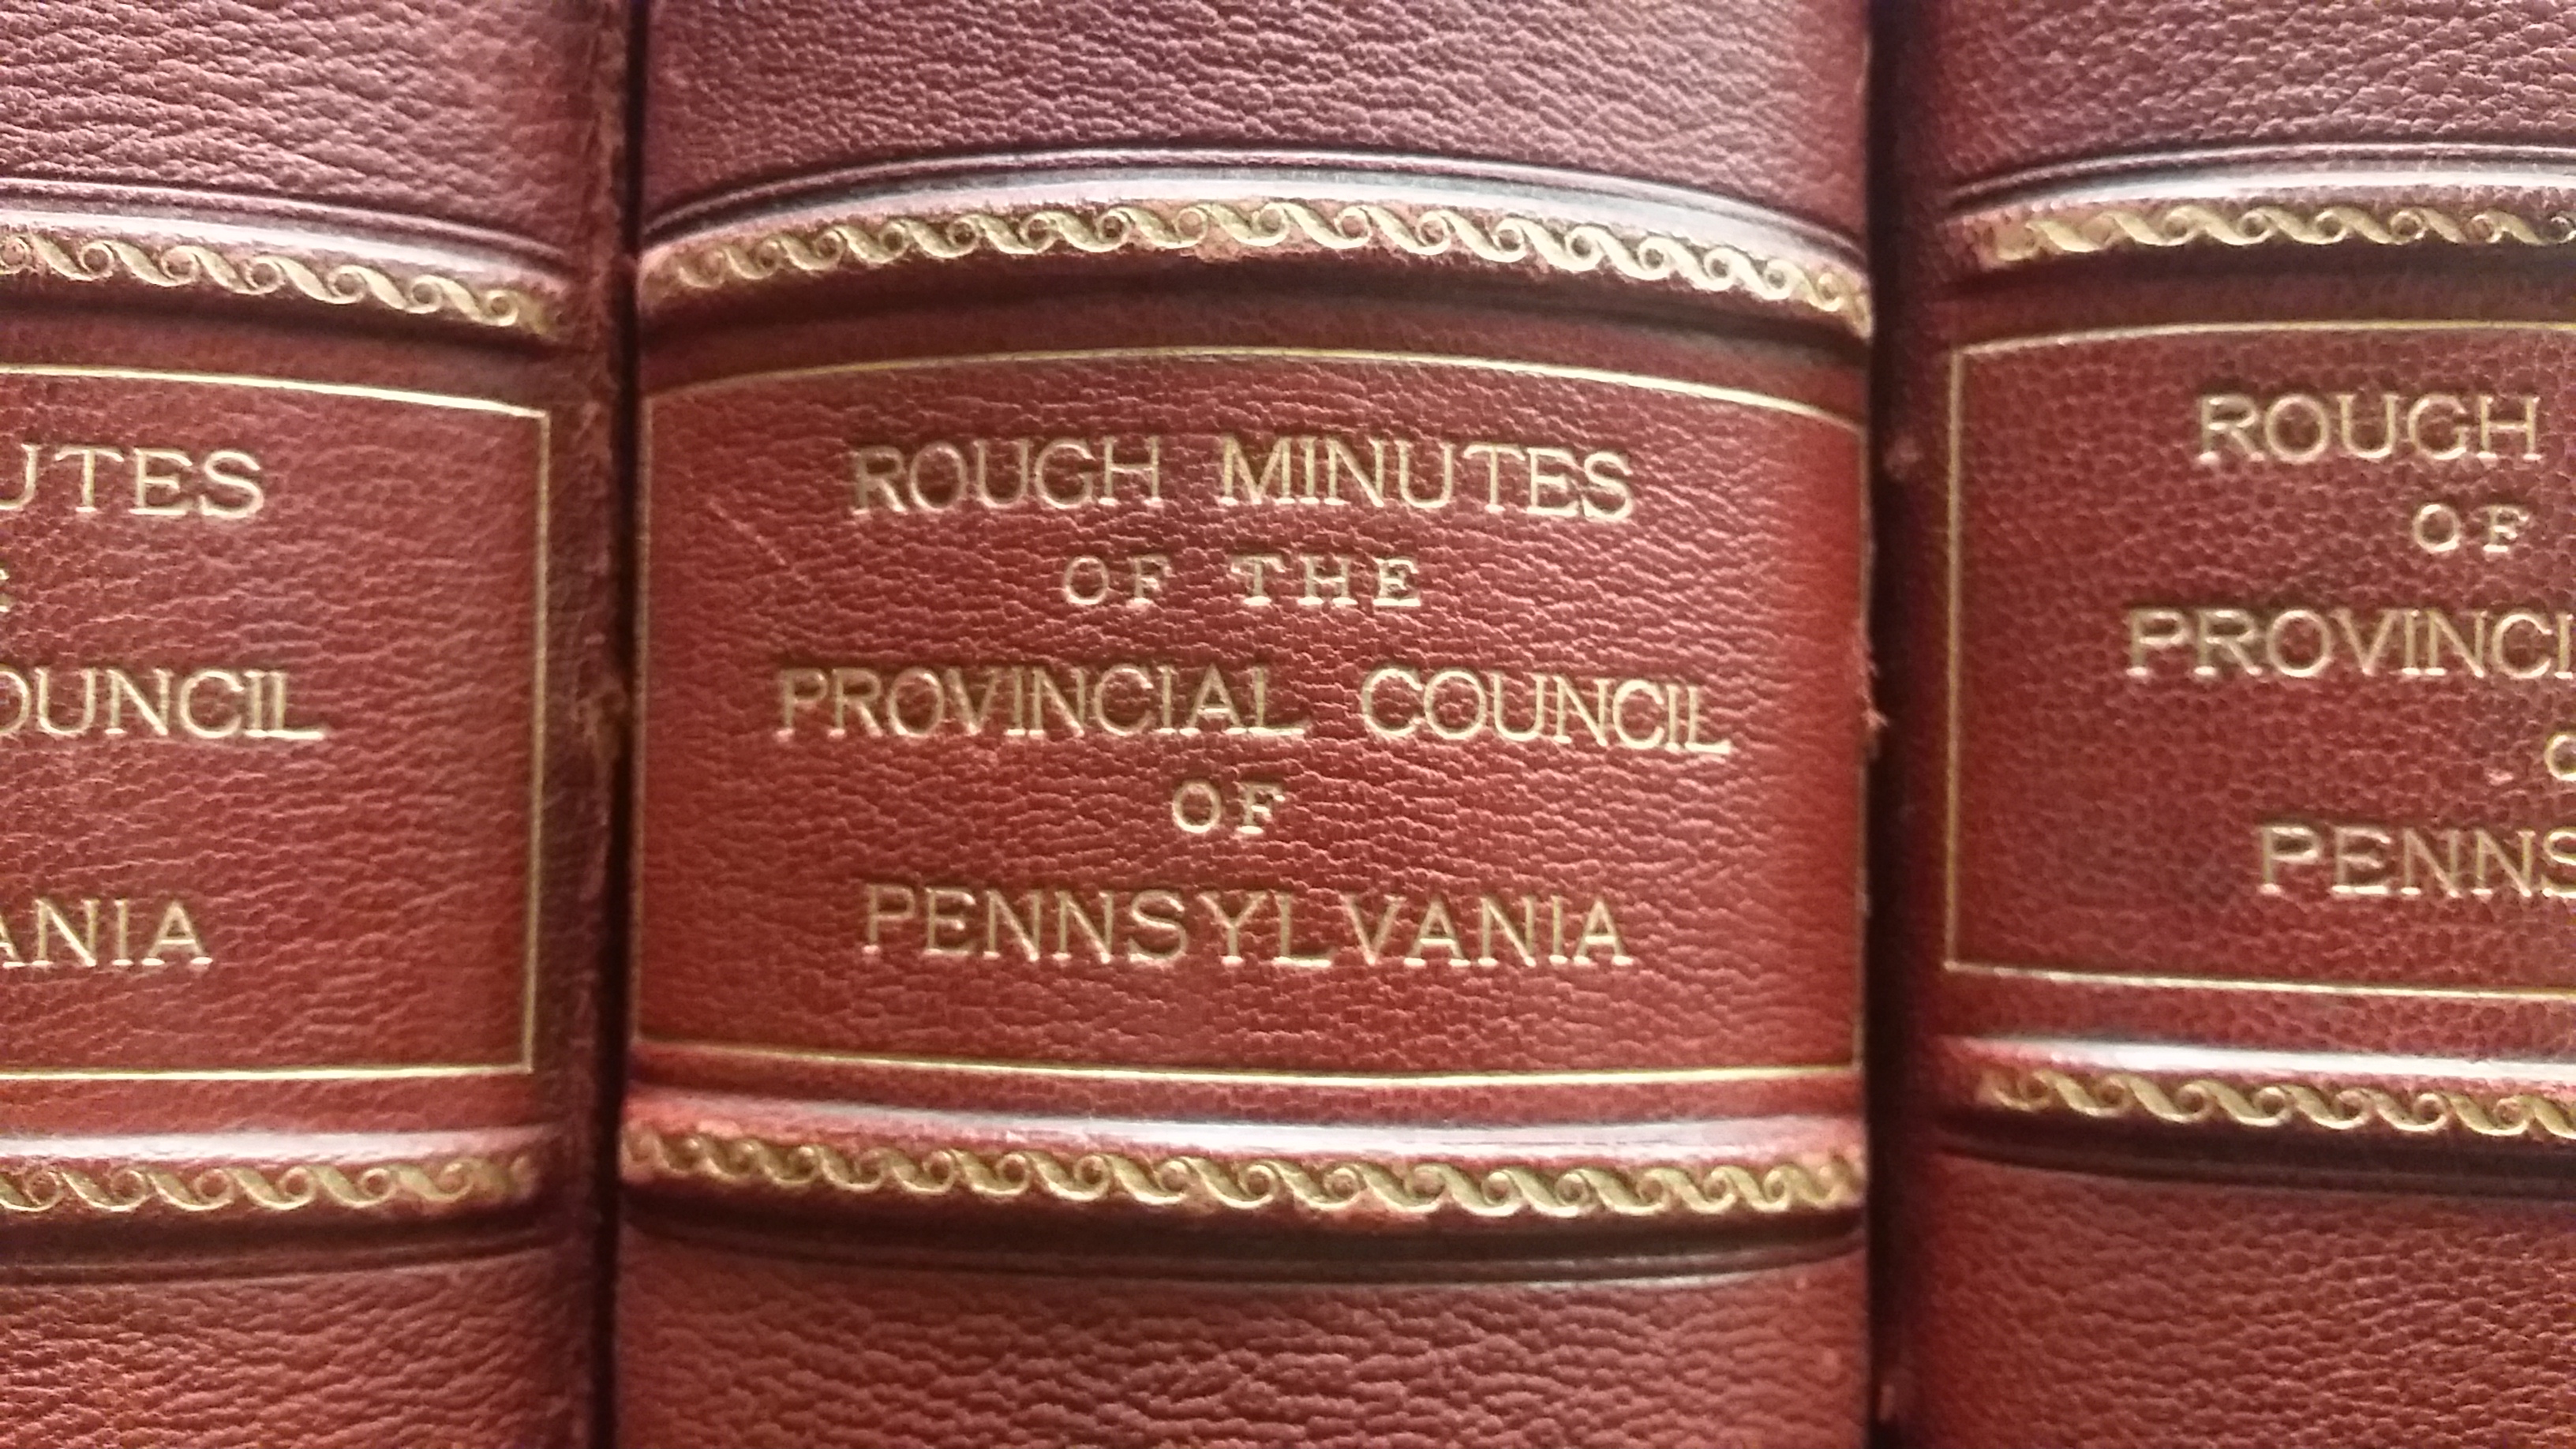 Book spine of council minutes volume